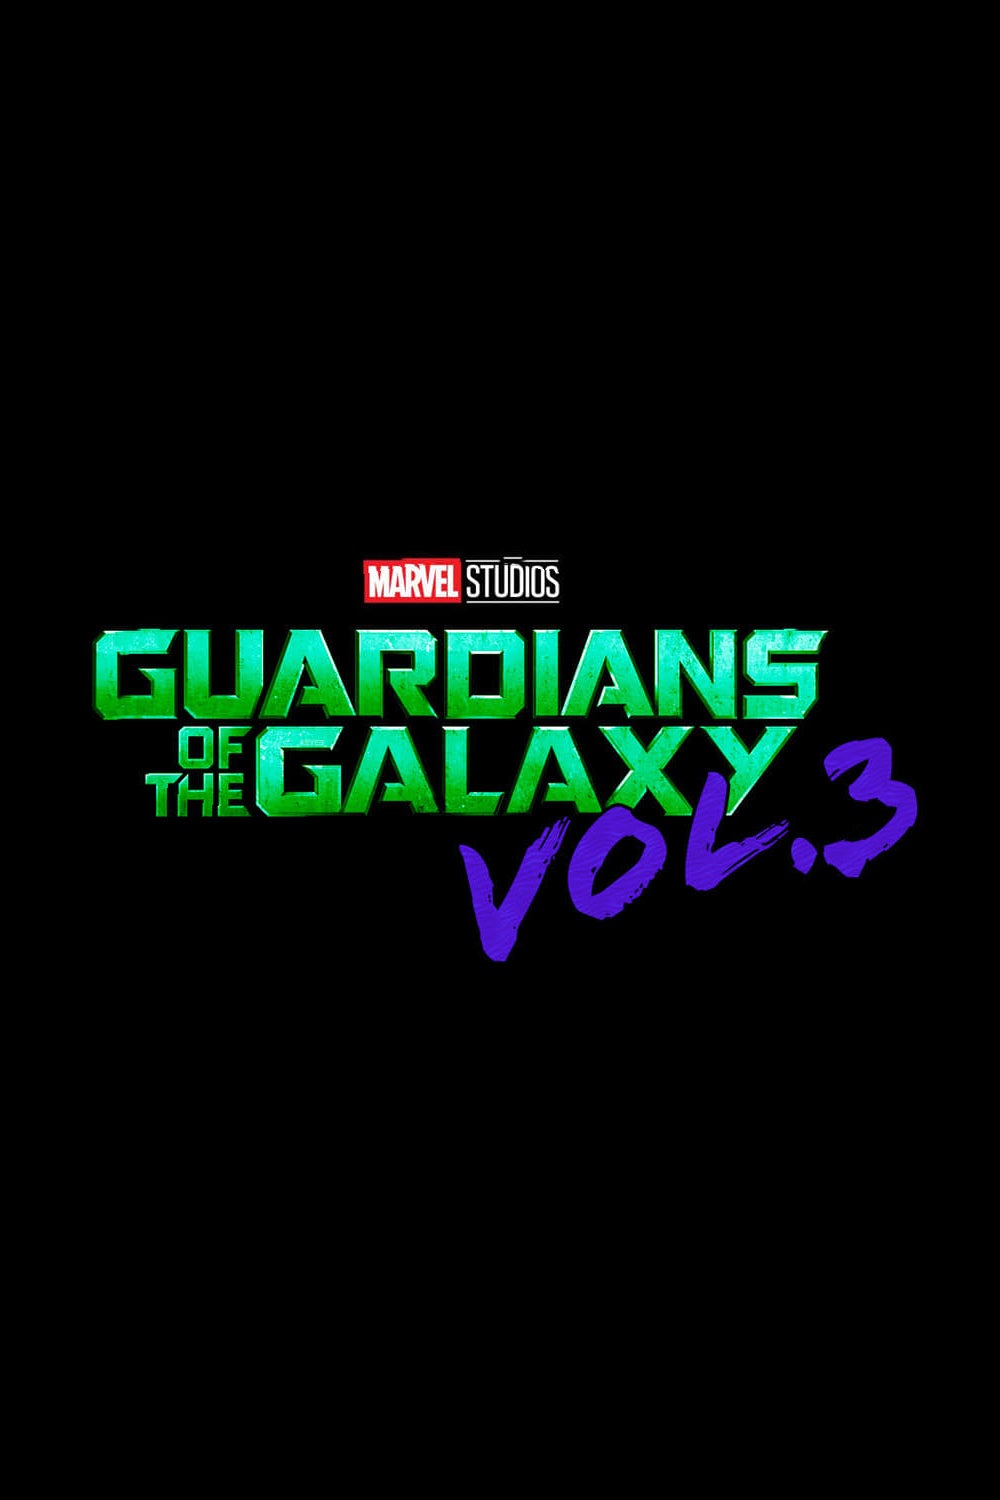 Logo image, that reads Marvel Studios Guardians of the Galaxy Vol 3, in green and purple